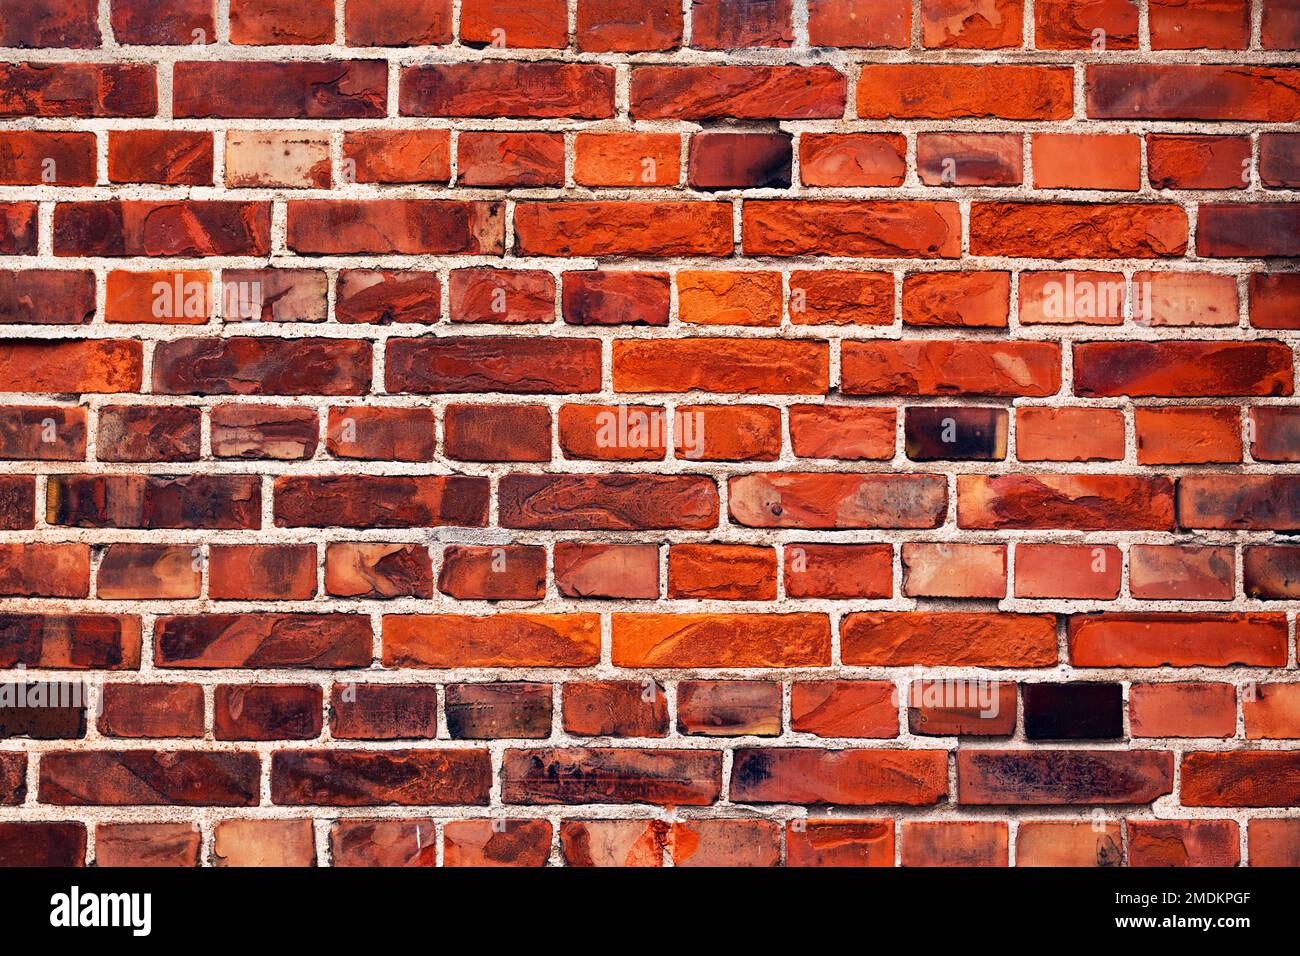 Vitrified rustic brick wall tile pattern as background. Scandinavian architecture style detail from Halmstad in Sweden. Stock Photo